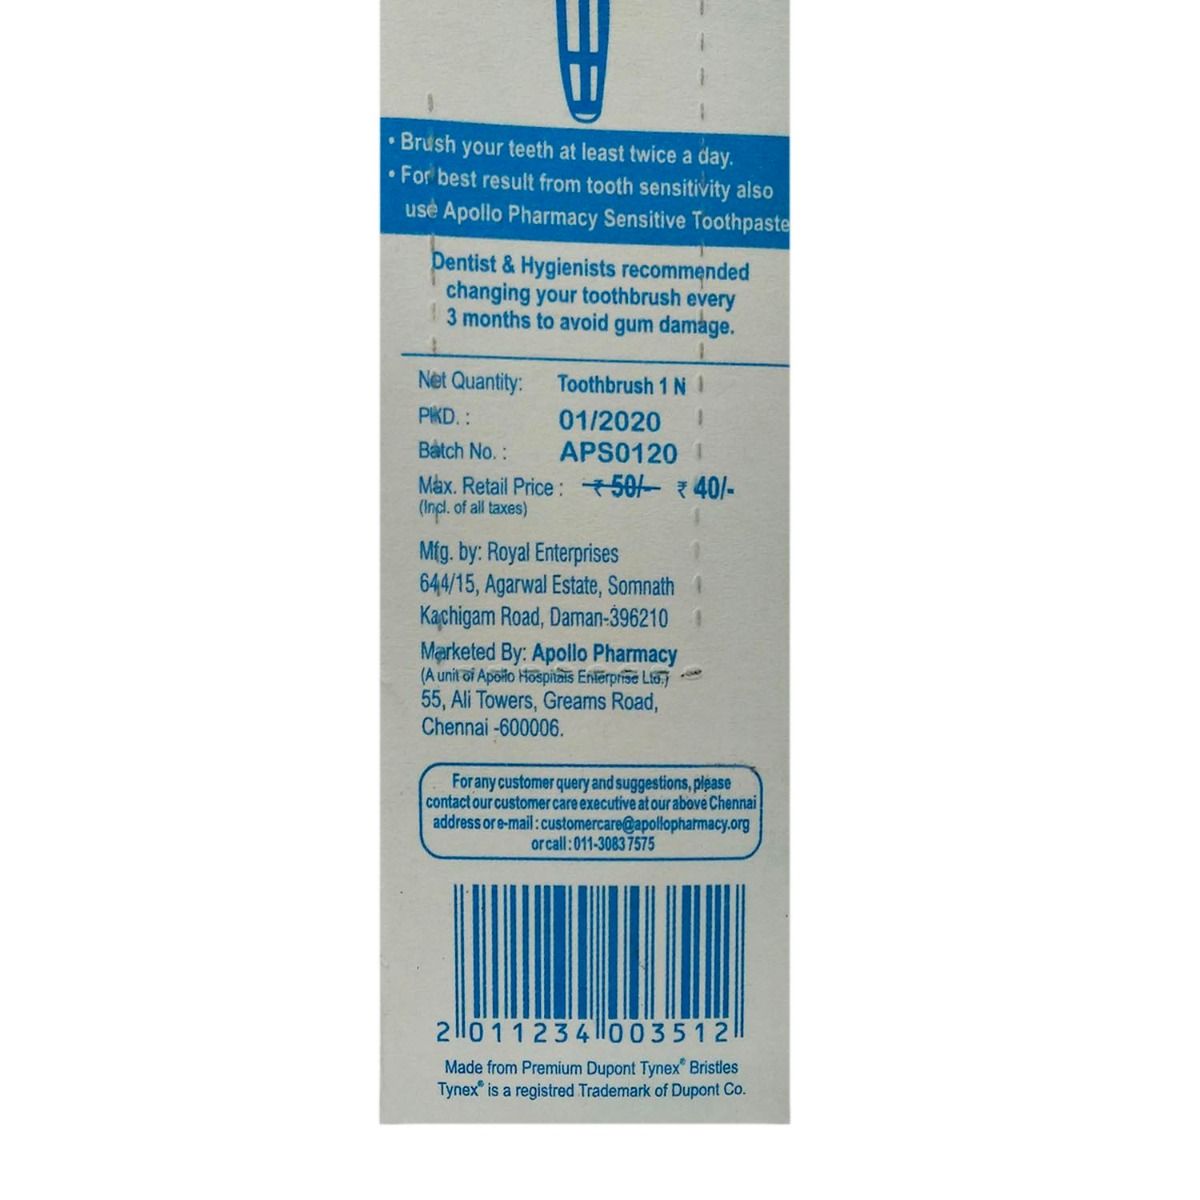 Apollo Pharmacy Sensitive+ Toothbrush, 1 Count, Pack of 1 